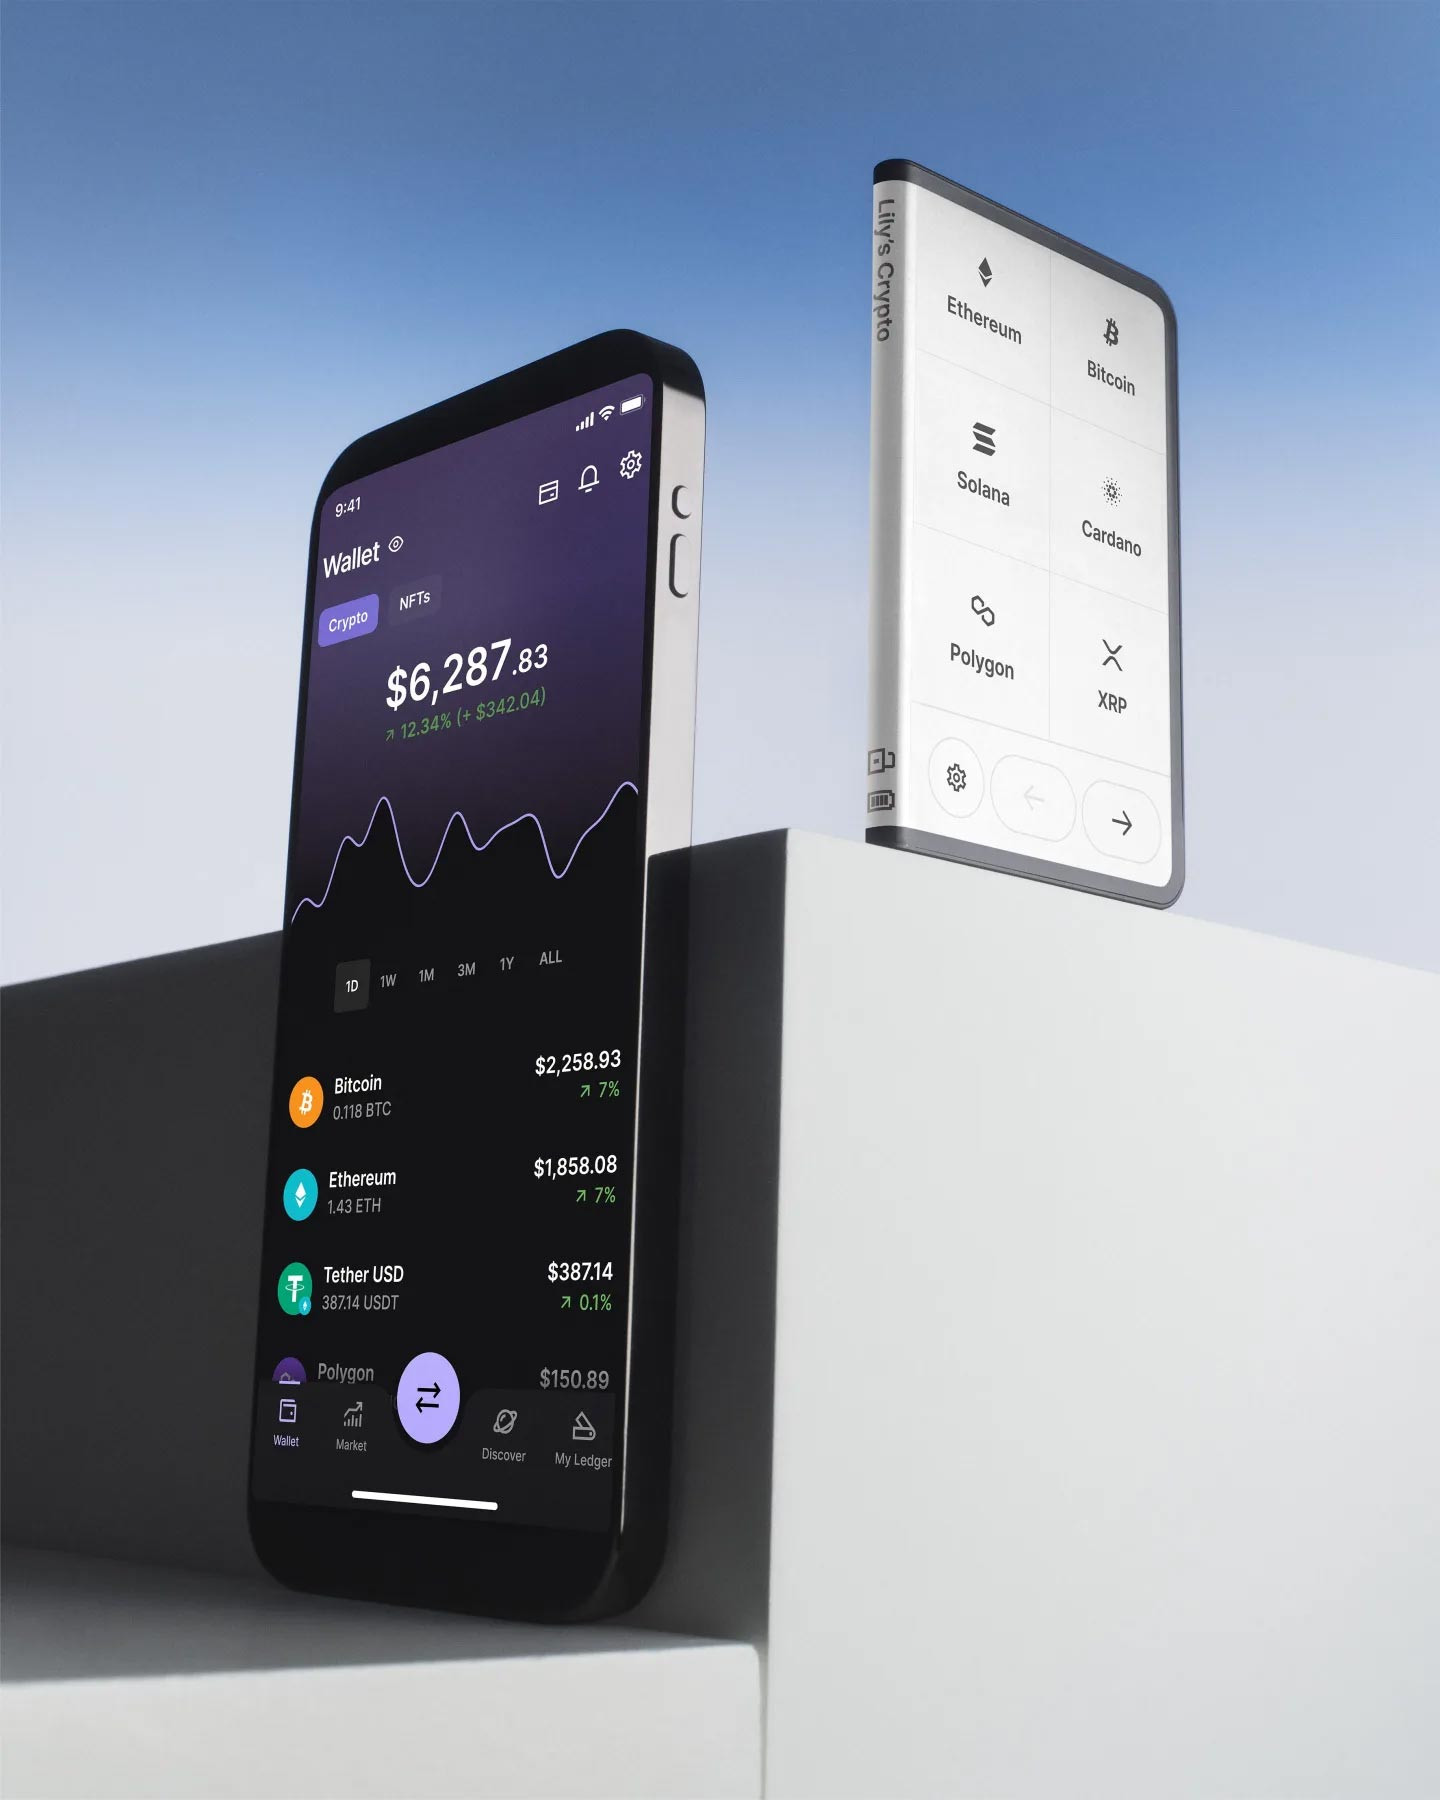 Legendary Apple designer lends his touch to new Ledger Stax crypto wallet